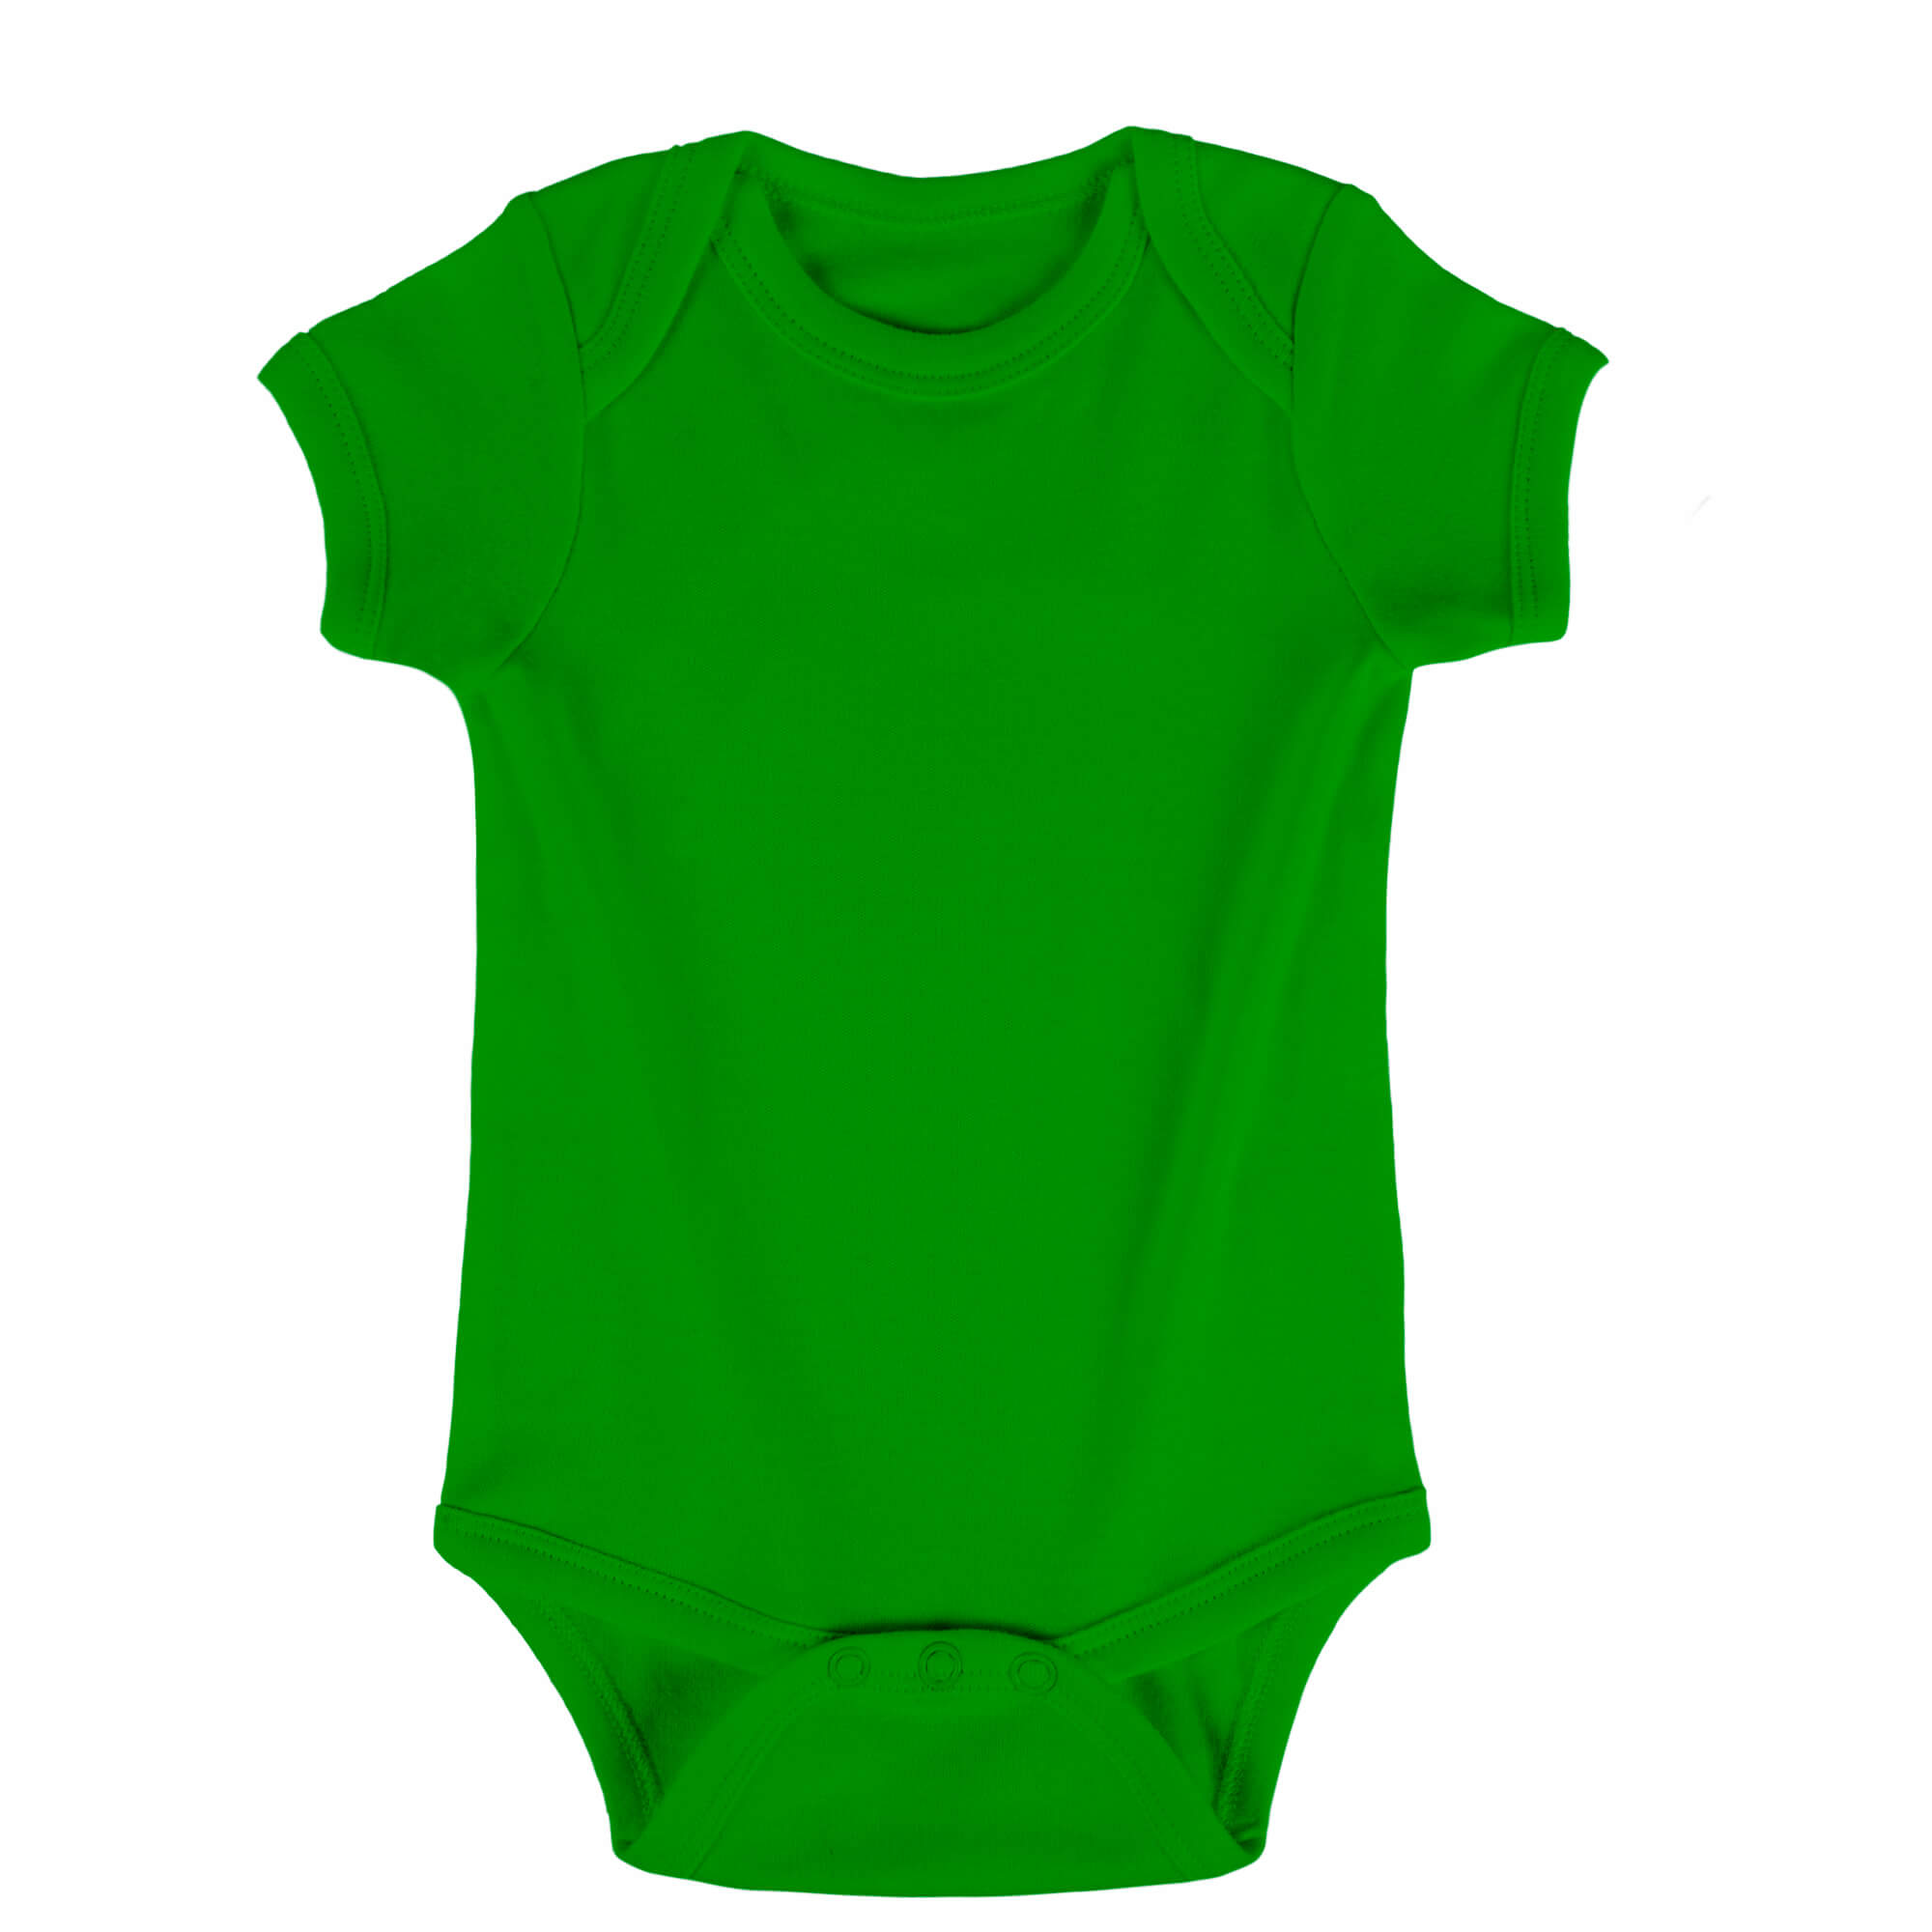 green color number #8, onesie color selection, and color display.